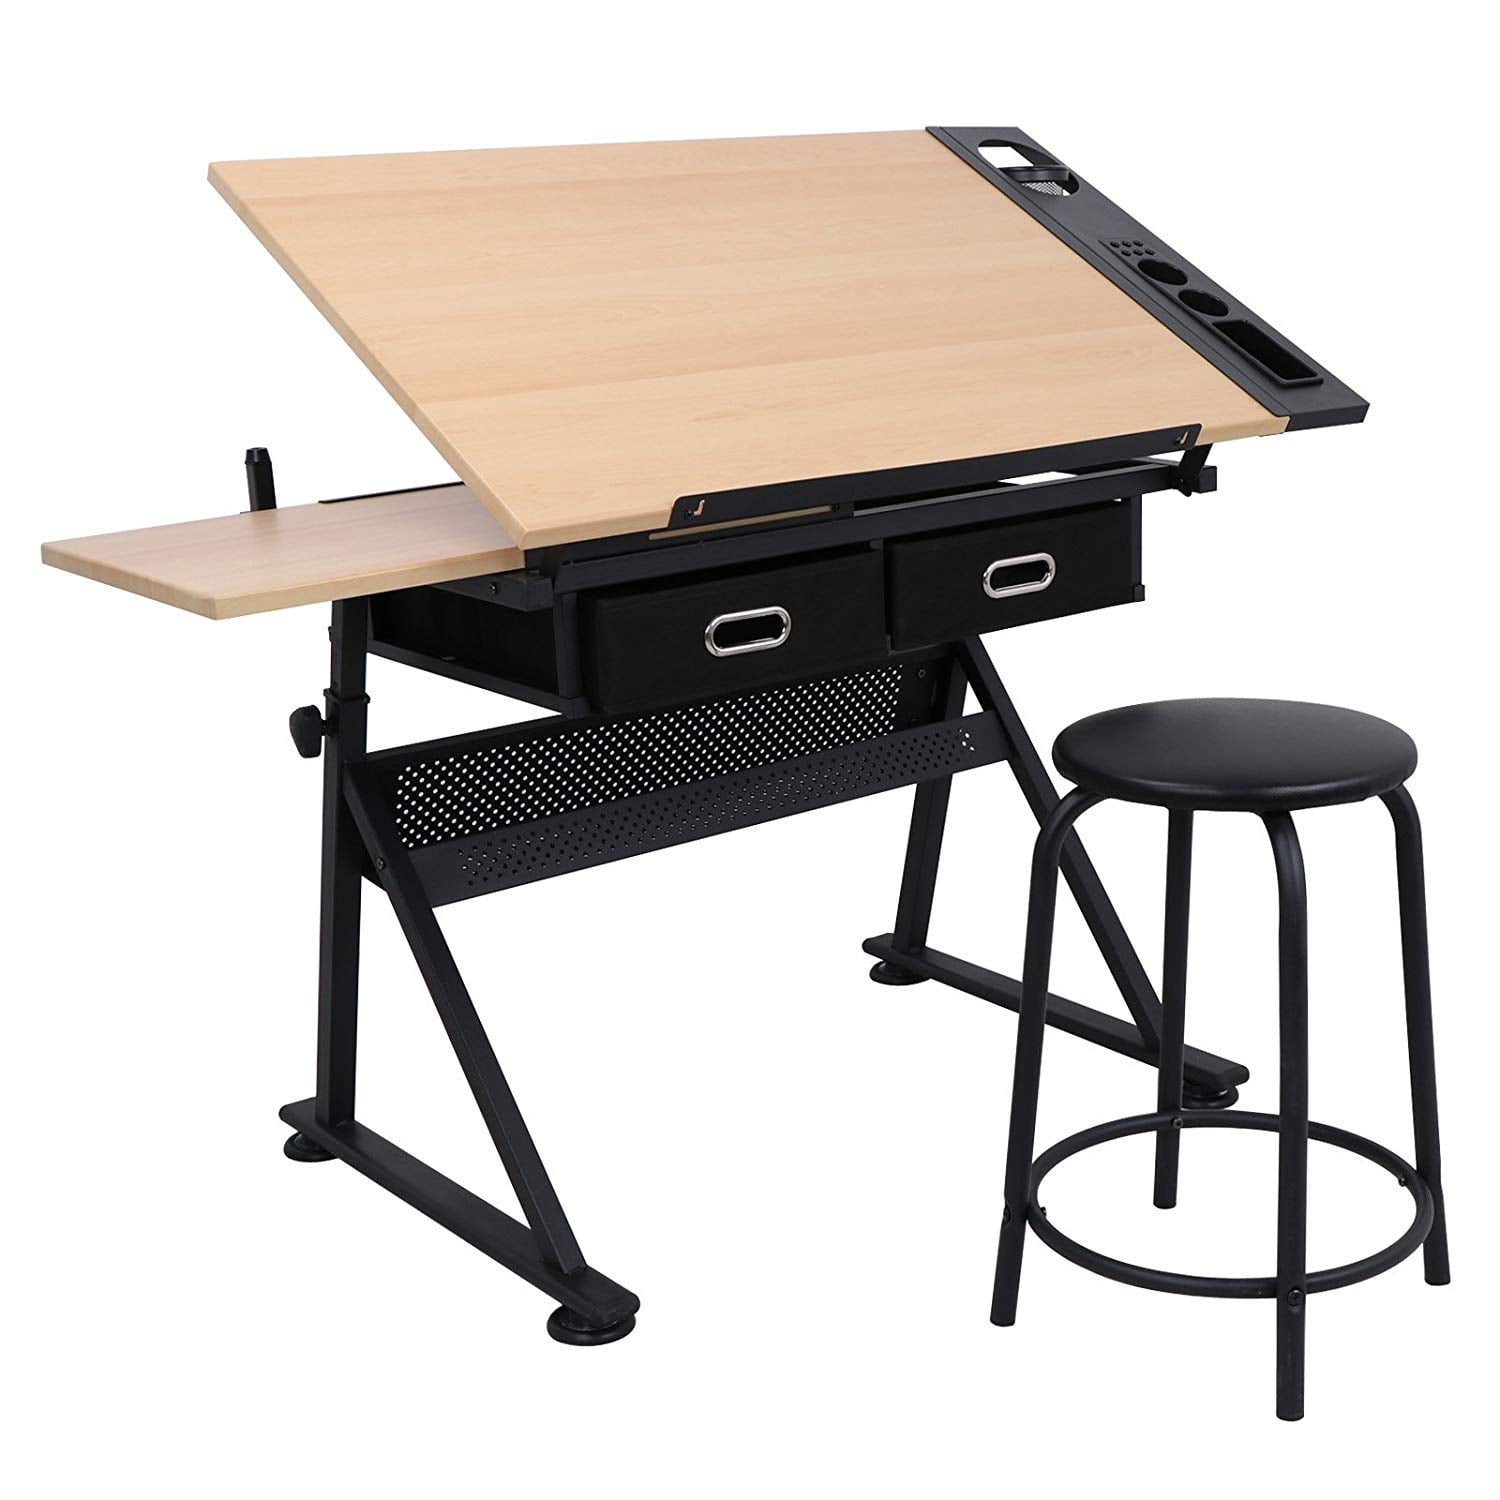 Drafting Drawing Table Desk Art And Craft Adjustable Height with Stool 2 Drawers 